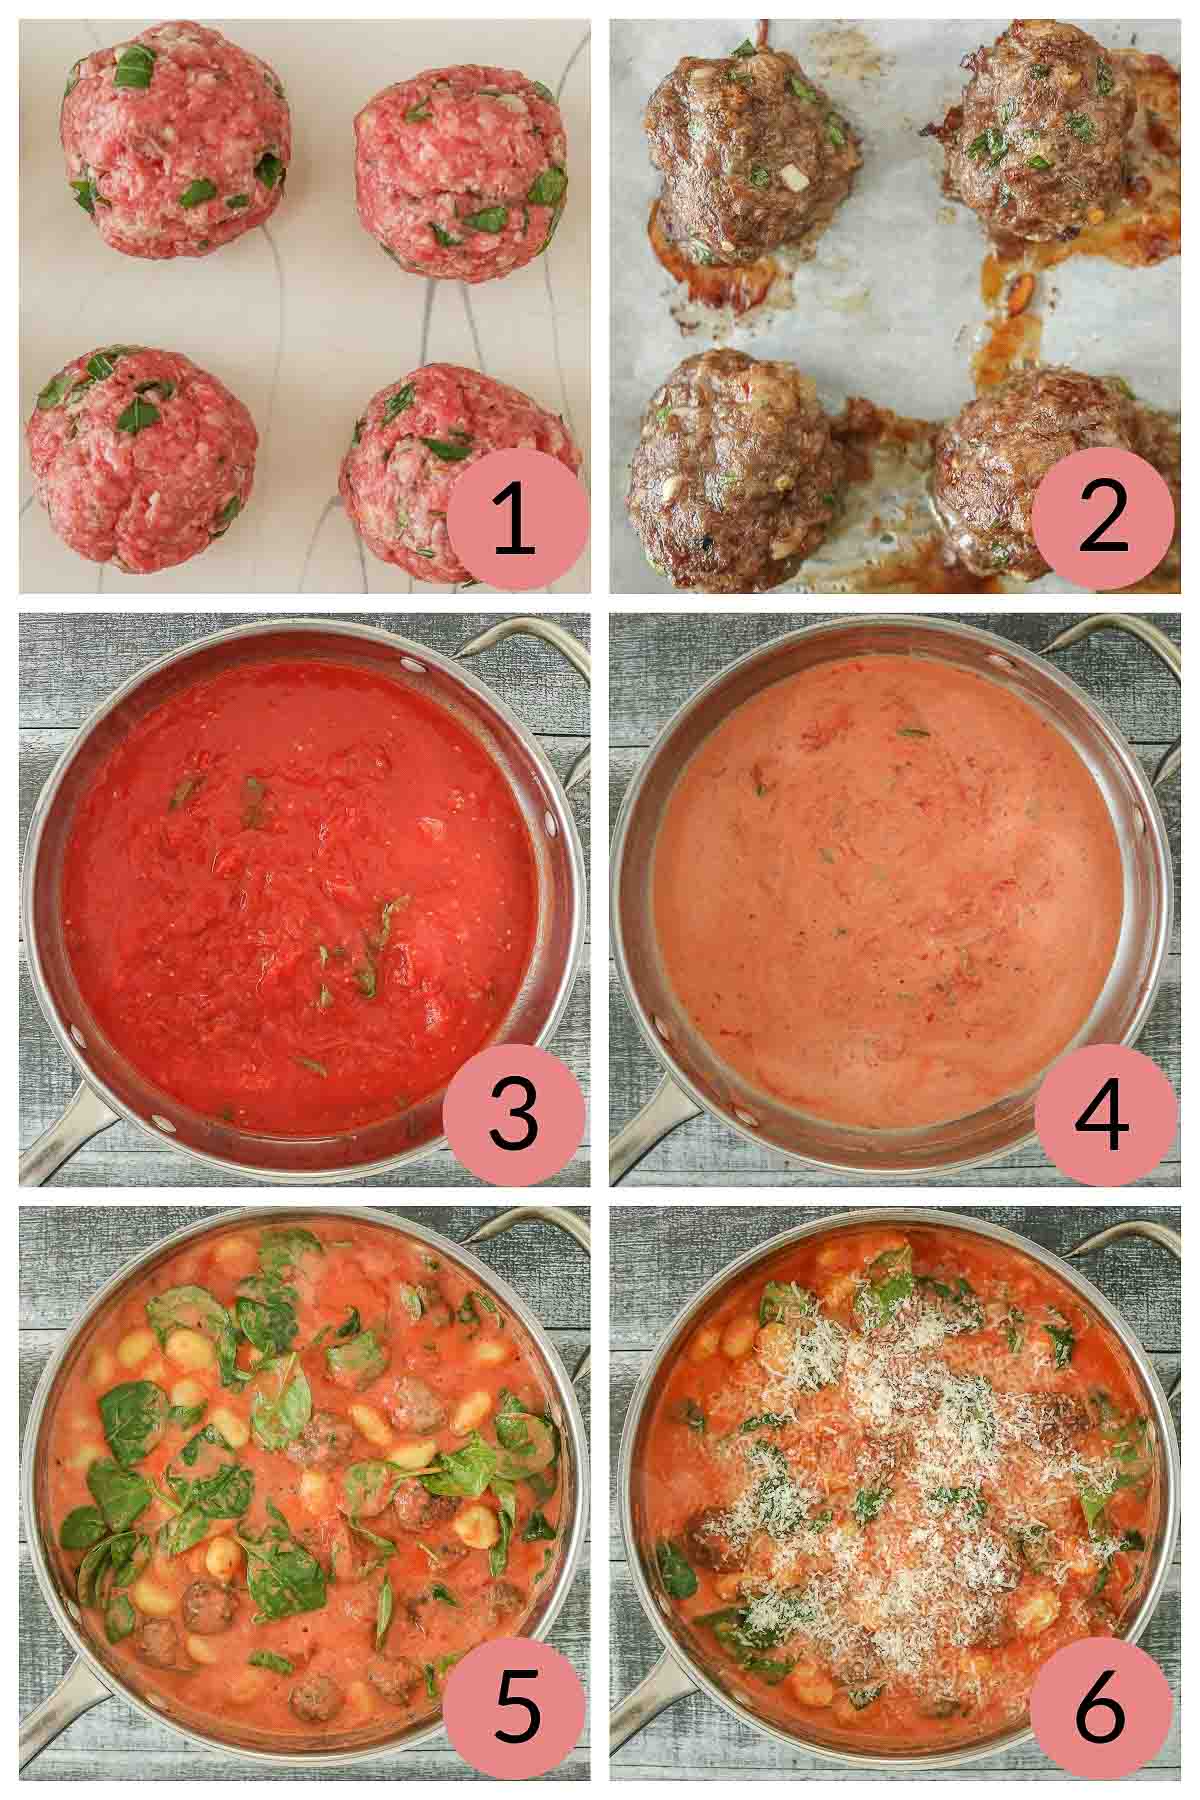 Collage of steps to a make a meatball and gnocchi recipe with creamy tomato sauce.